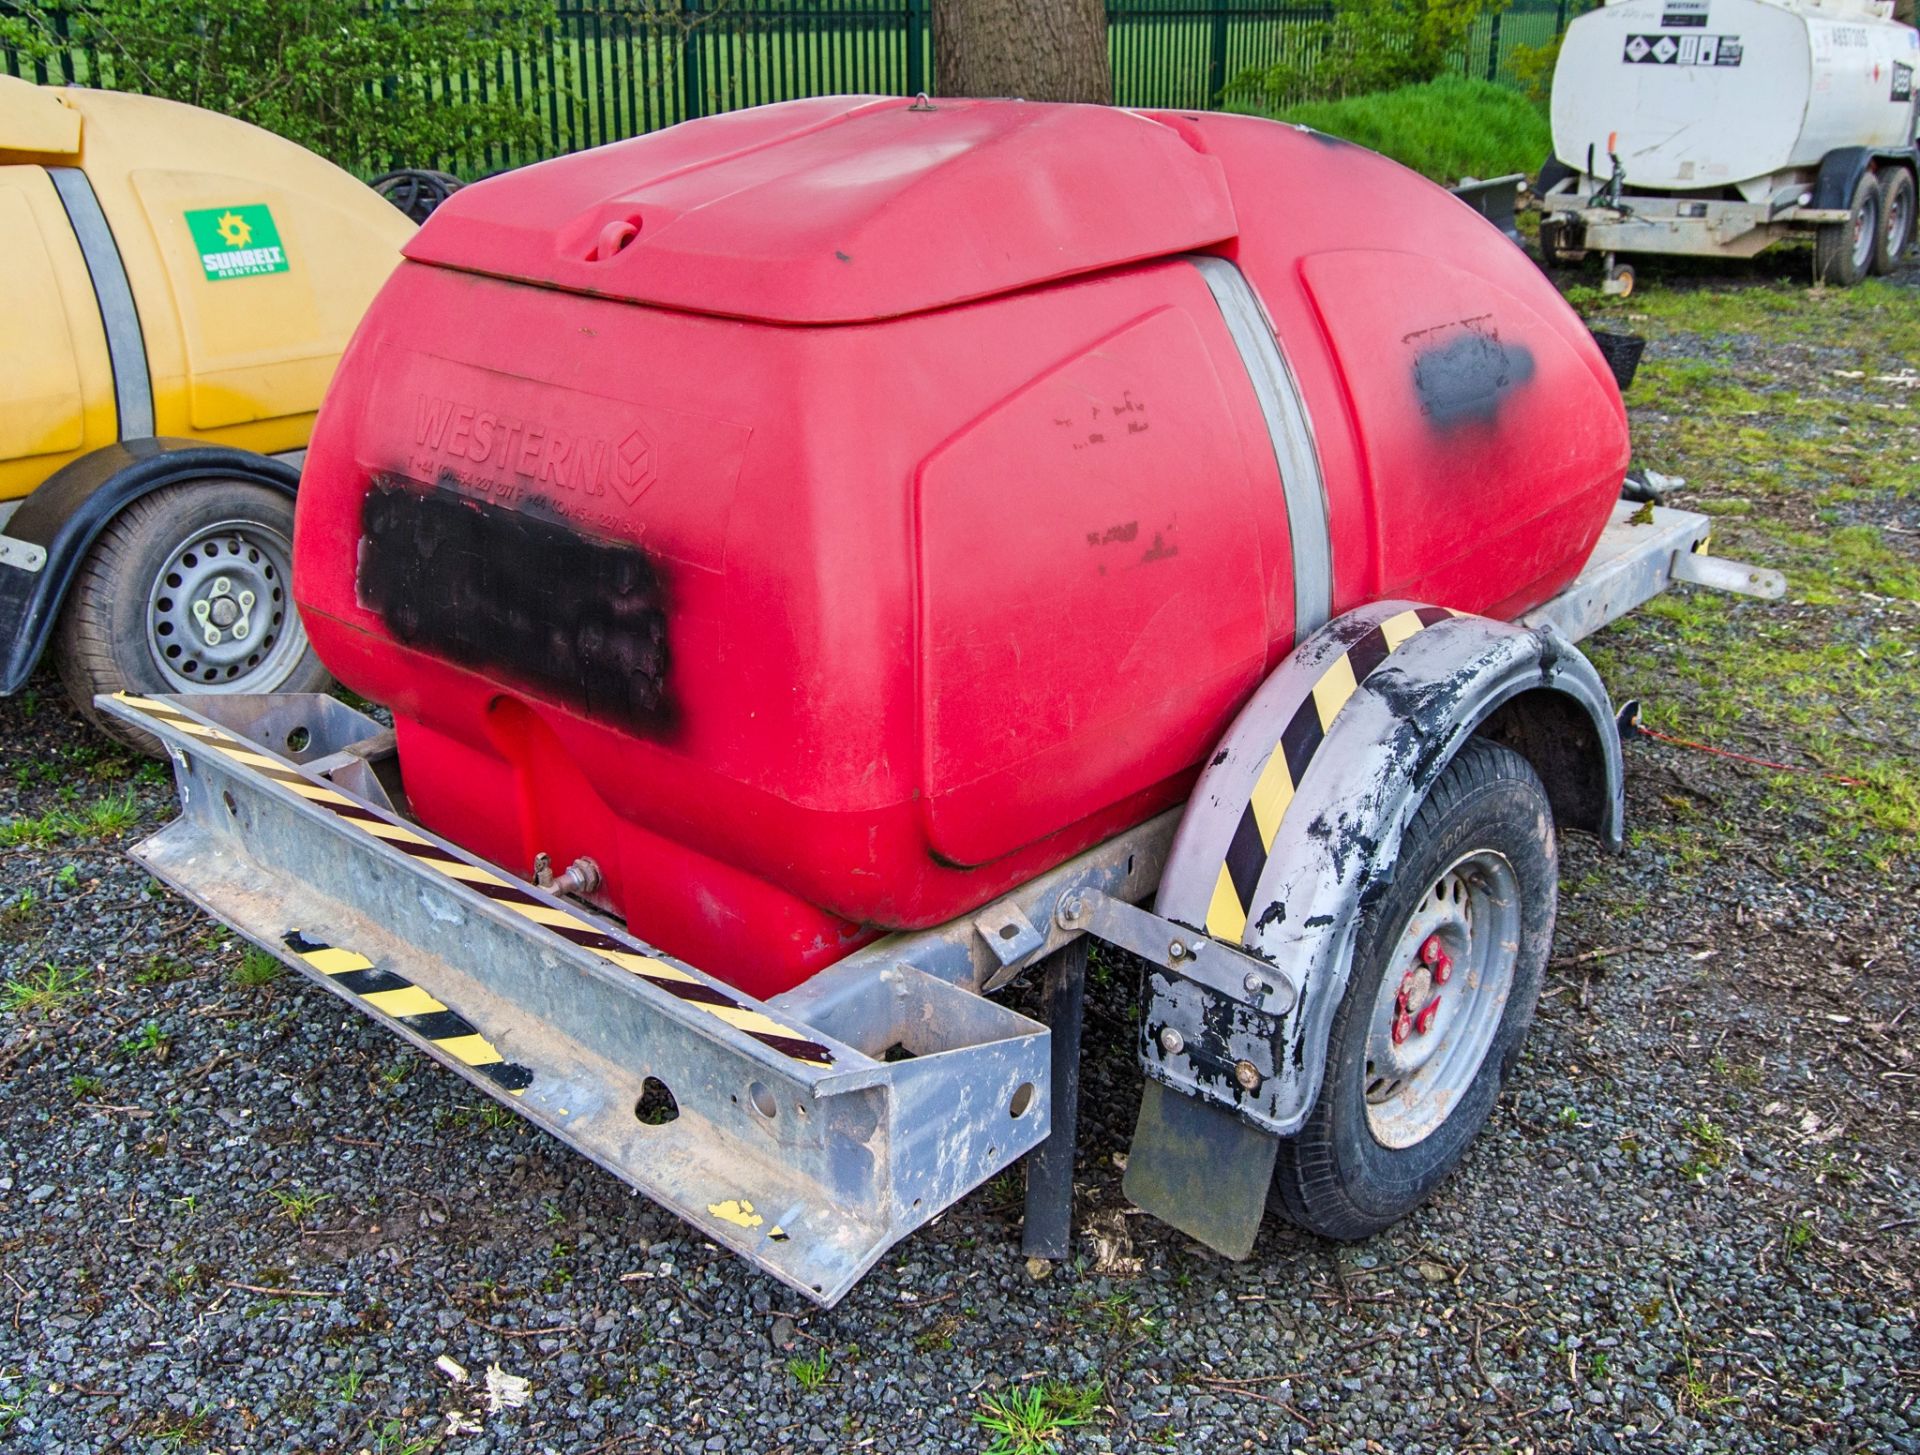 Western 1000 litre fast tow mobile water bowser 15025032 - Image 3 of 6